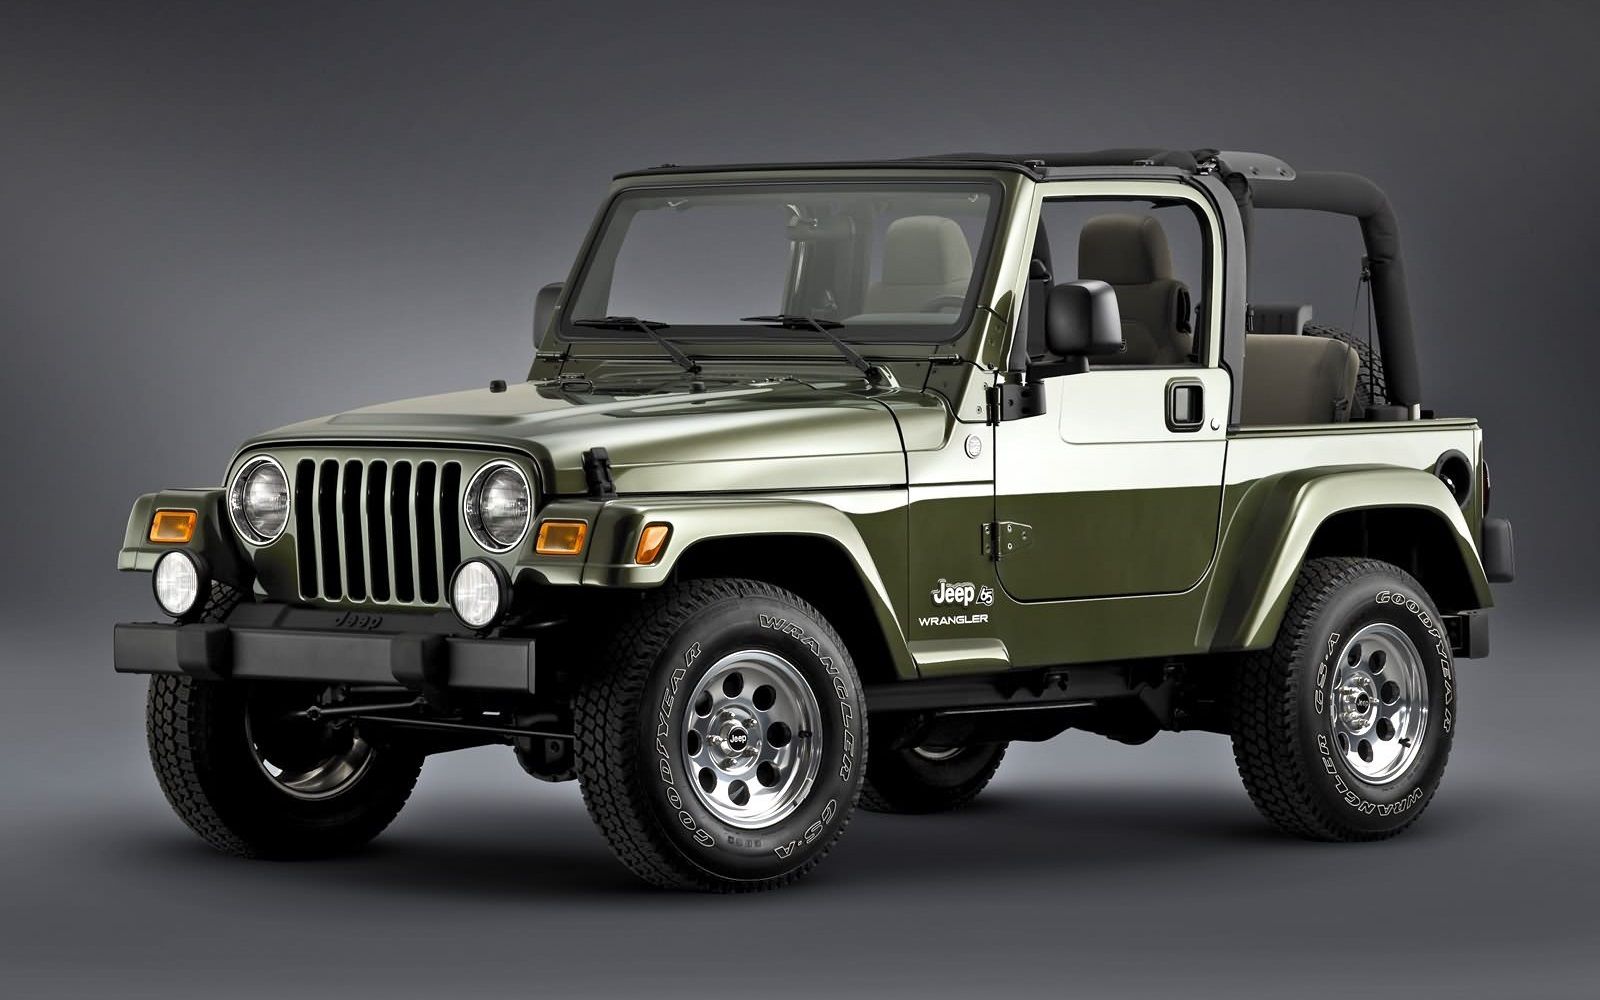 2007 Jeep Wrangler Sahara 0-60 Times, Top Speed, Specs, Quarter Mile, and  Wallpapers - MyCarSpecs United States / USA